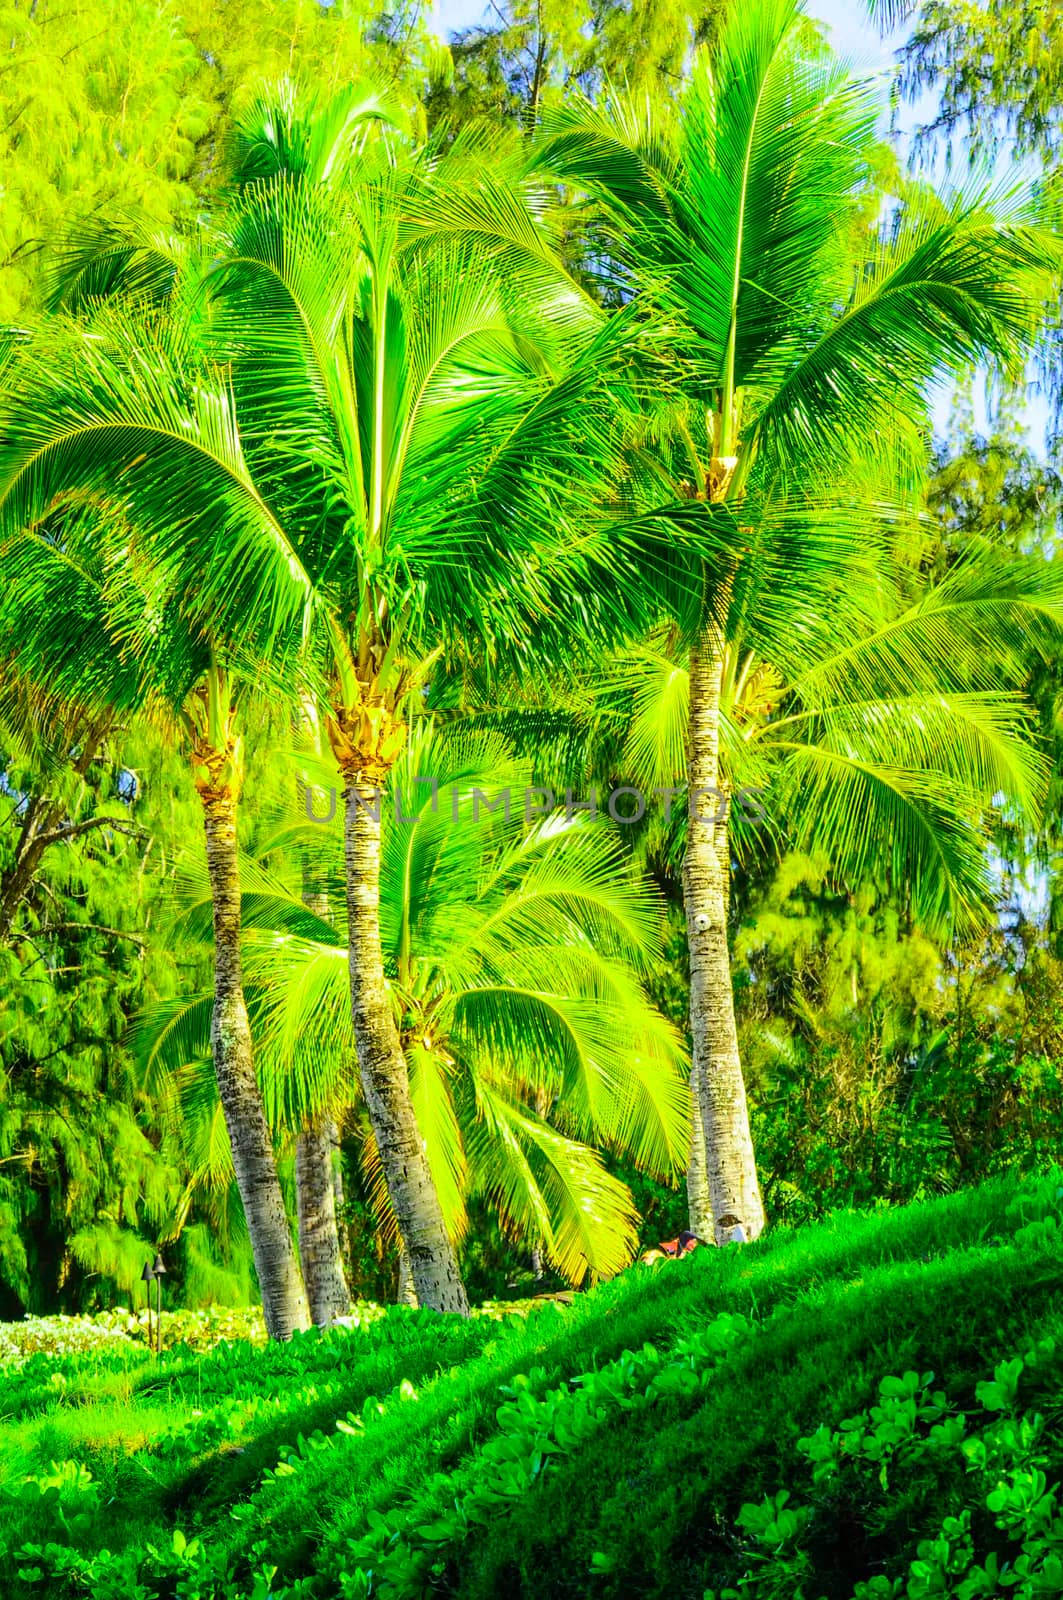 Scene on Maui of Palm trees and other vegetation on sunny day